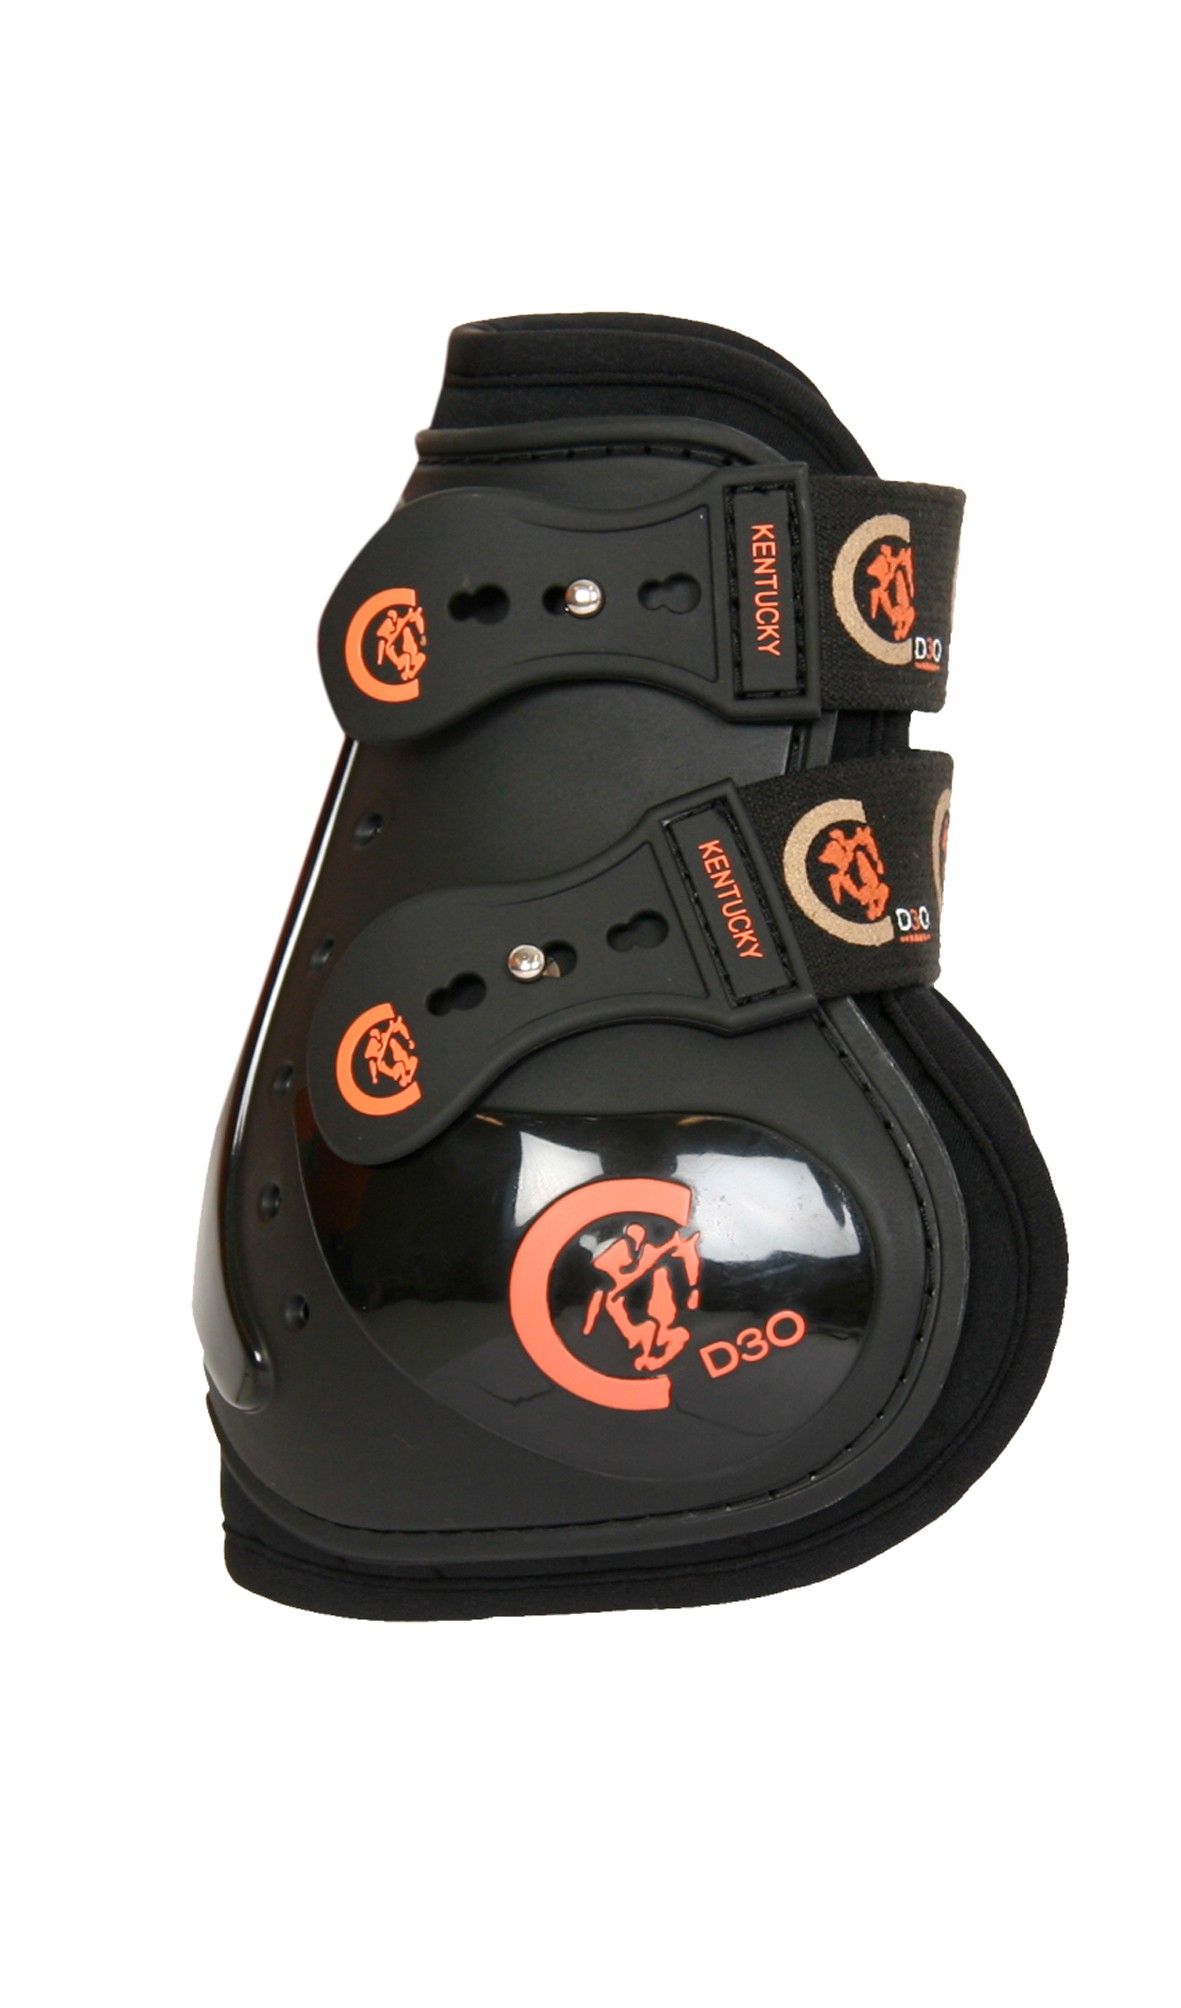 PEI Turnout Mud Fever Boots - Four Star Eventing Gear